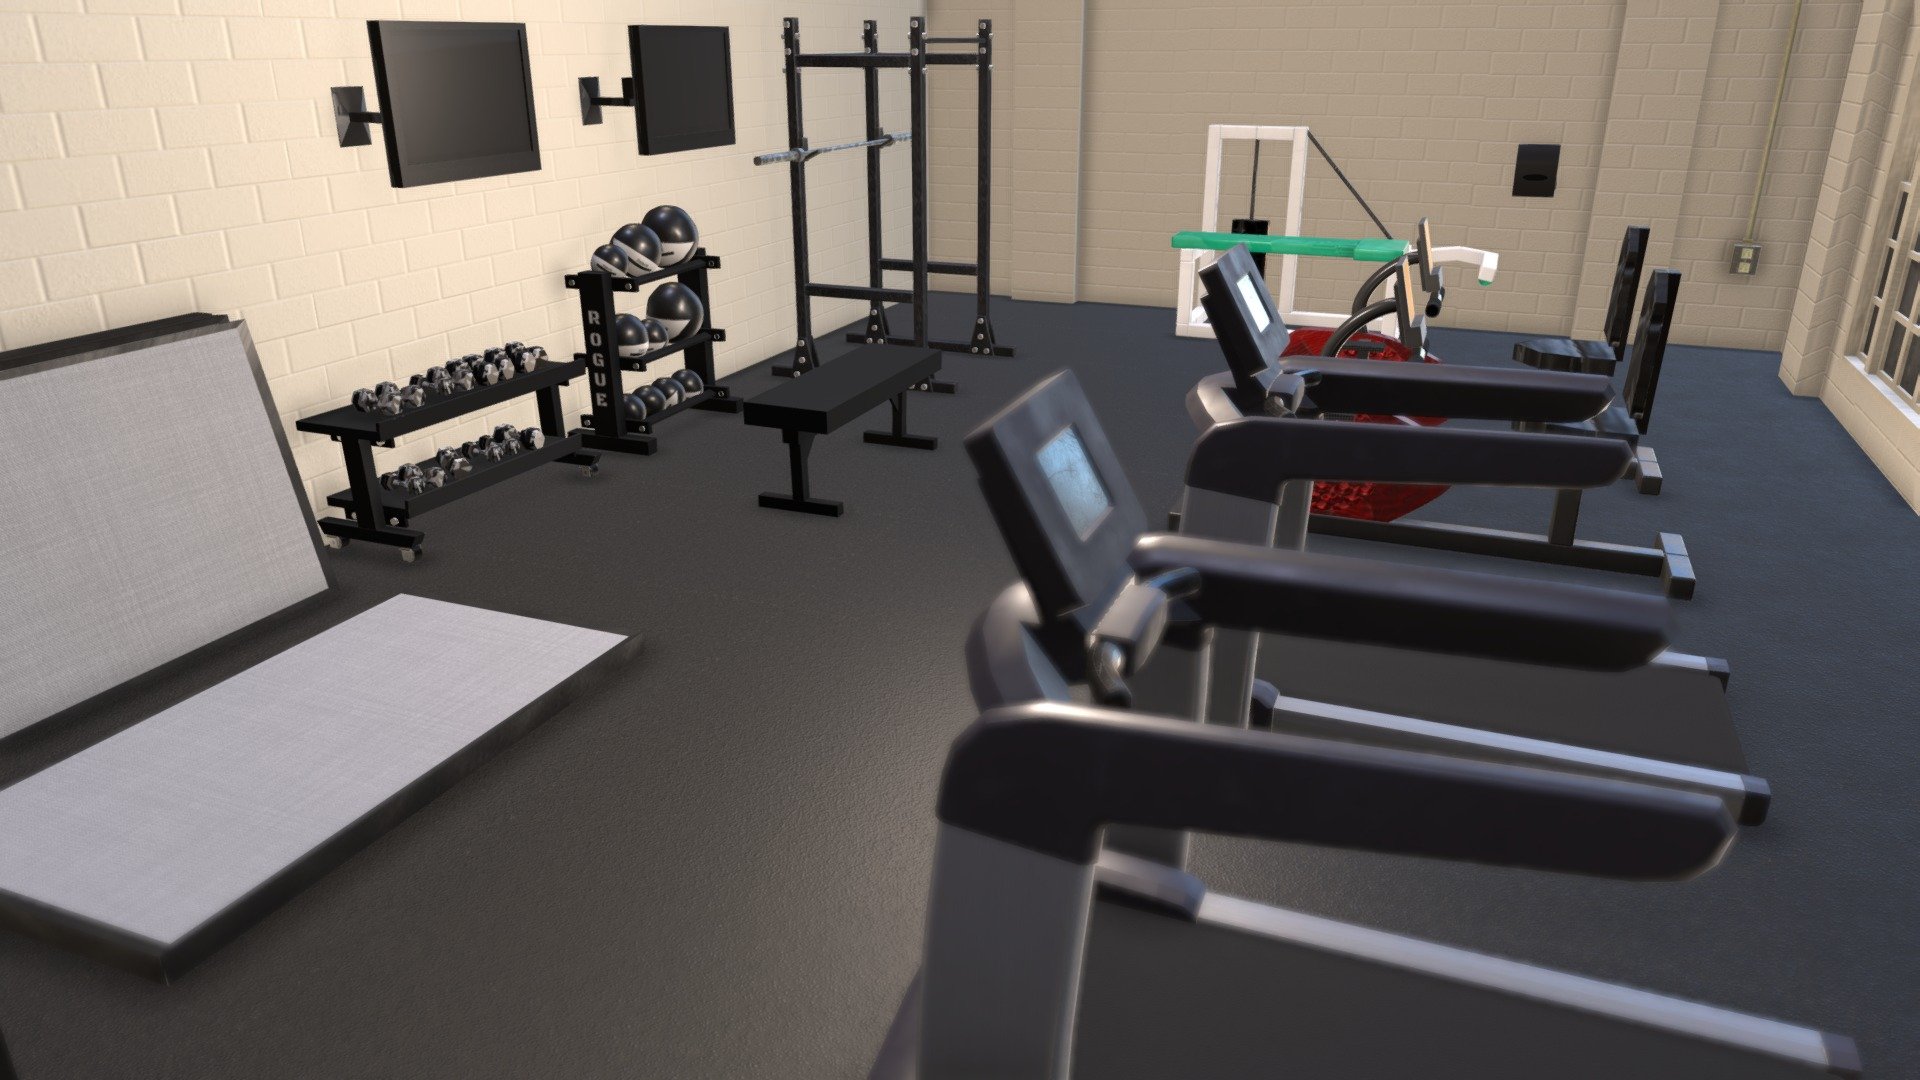 A modular environment inspired by our school's gym. Created as a group by myself, Matthew, Tyler, and Kyle 3d model